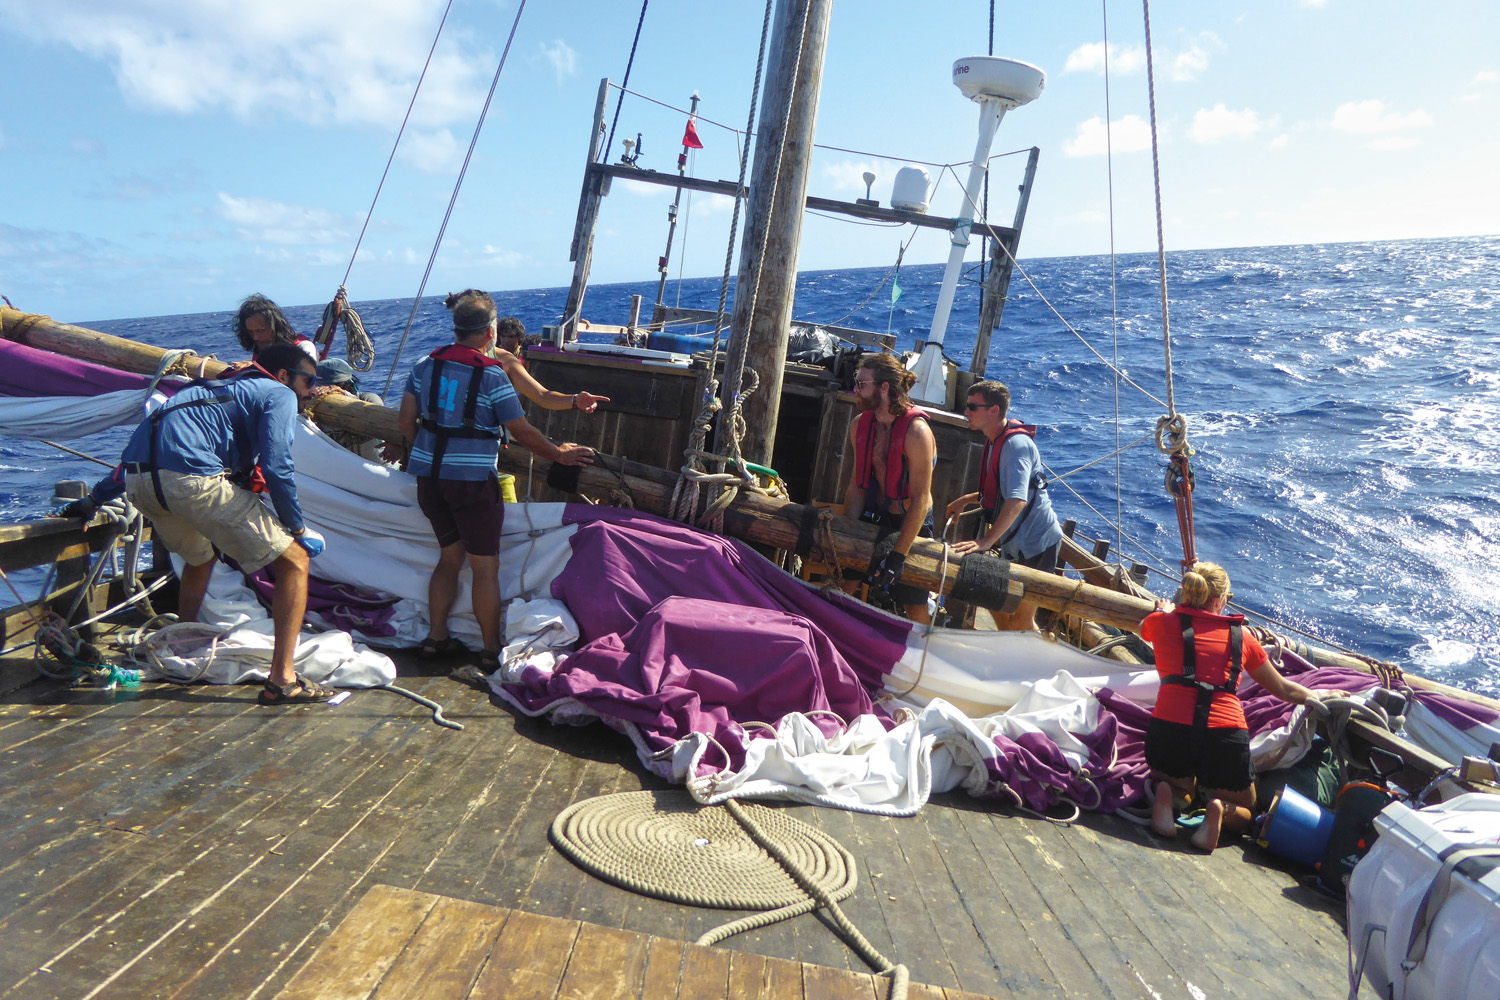 Rocked on Atlantic swells, the crew had to repair two holes in the sail caused by strong winds and replace two ropes that had been snapped off the week before. 